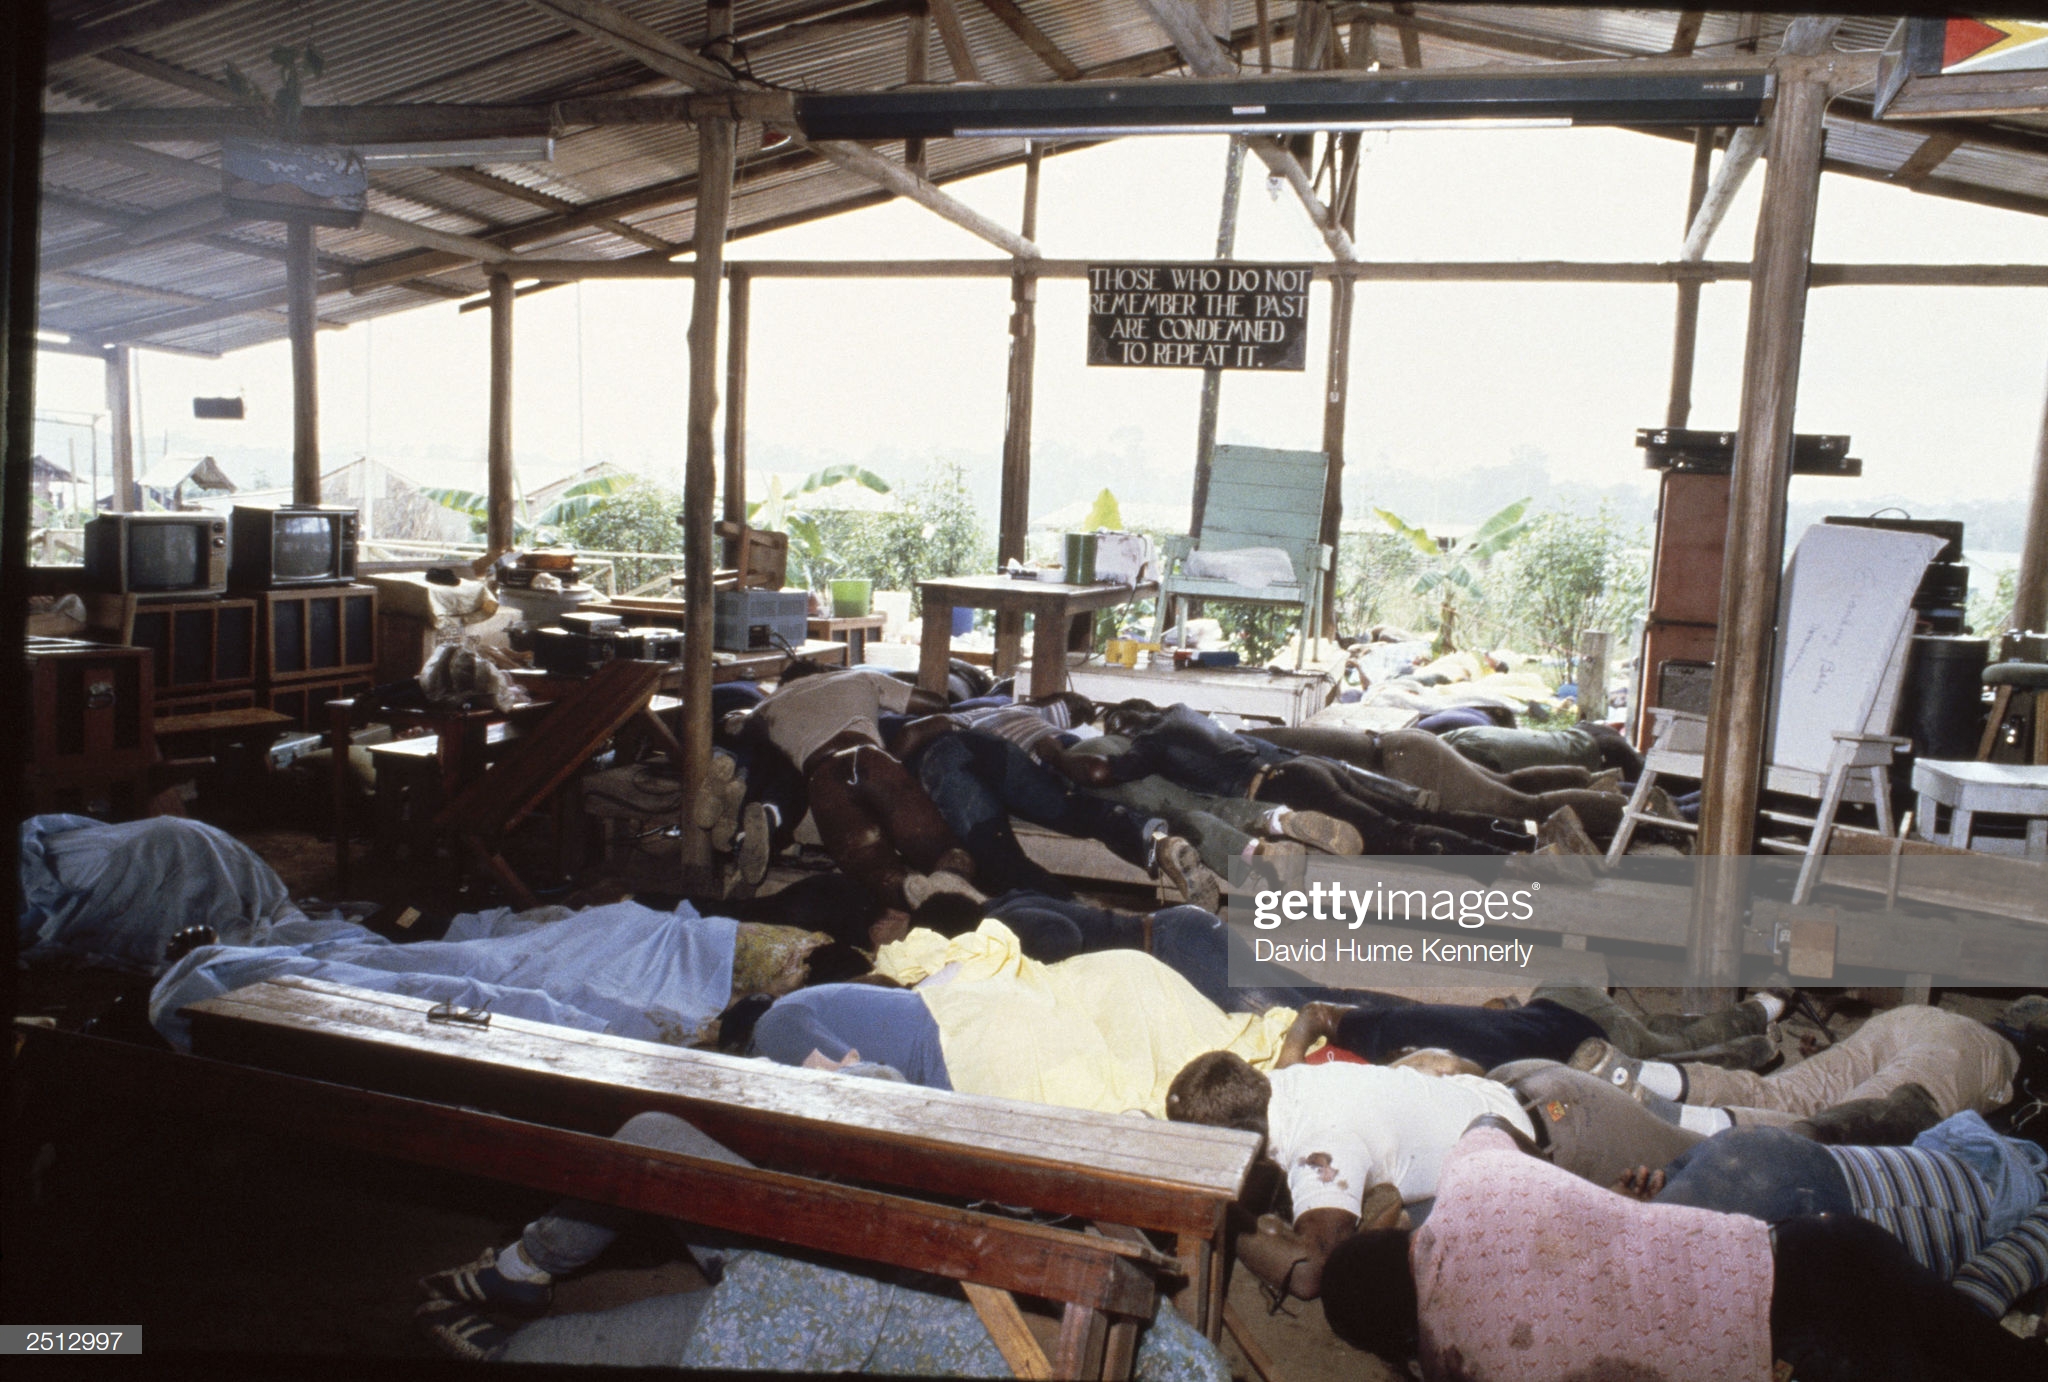 Dead bodies lie in the compound of the People's Temple cult